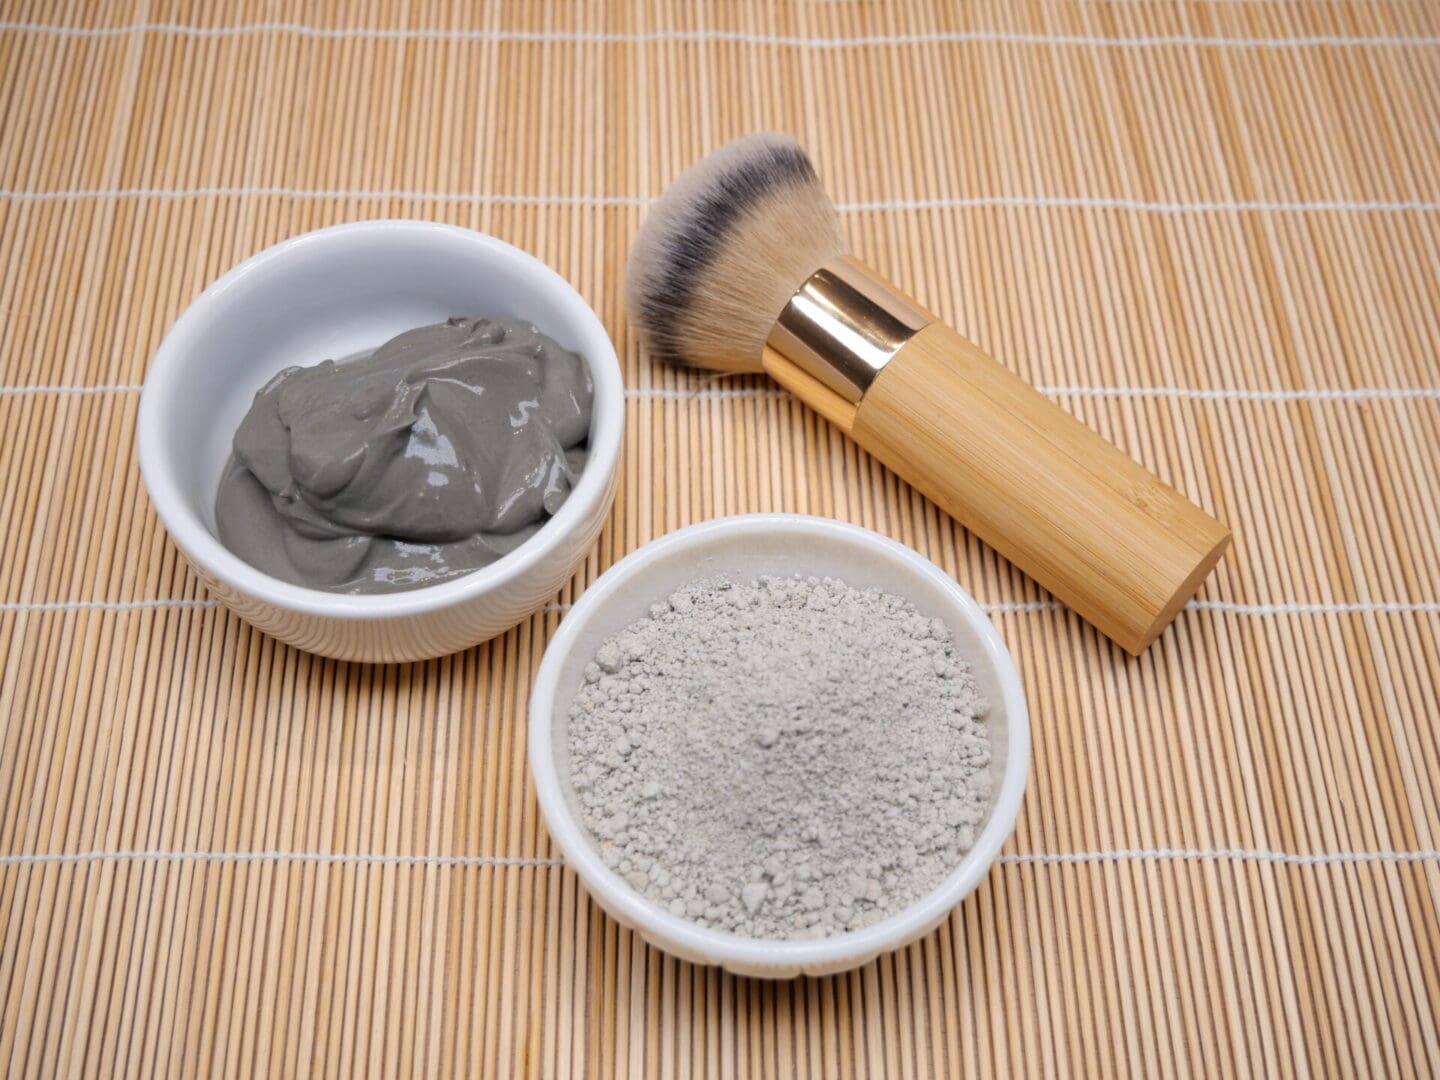 Two bowls of French Green Clay Face Mask Powder Clarifying & Pore Minimizer and a brush on a bamboo mat.